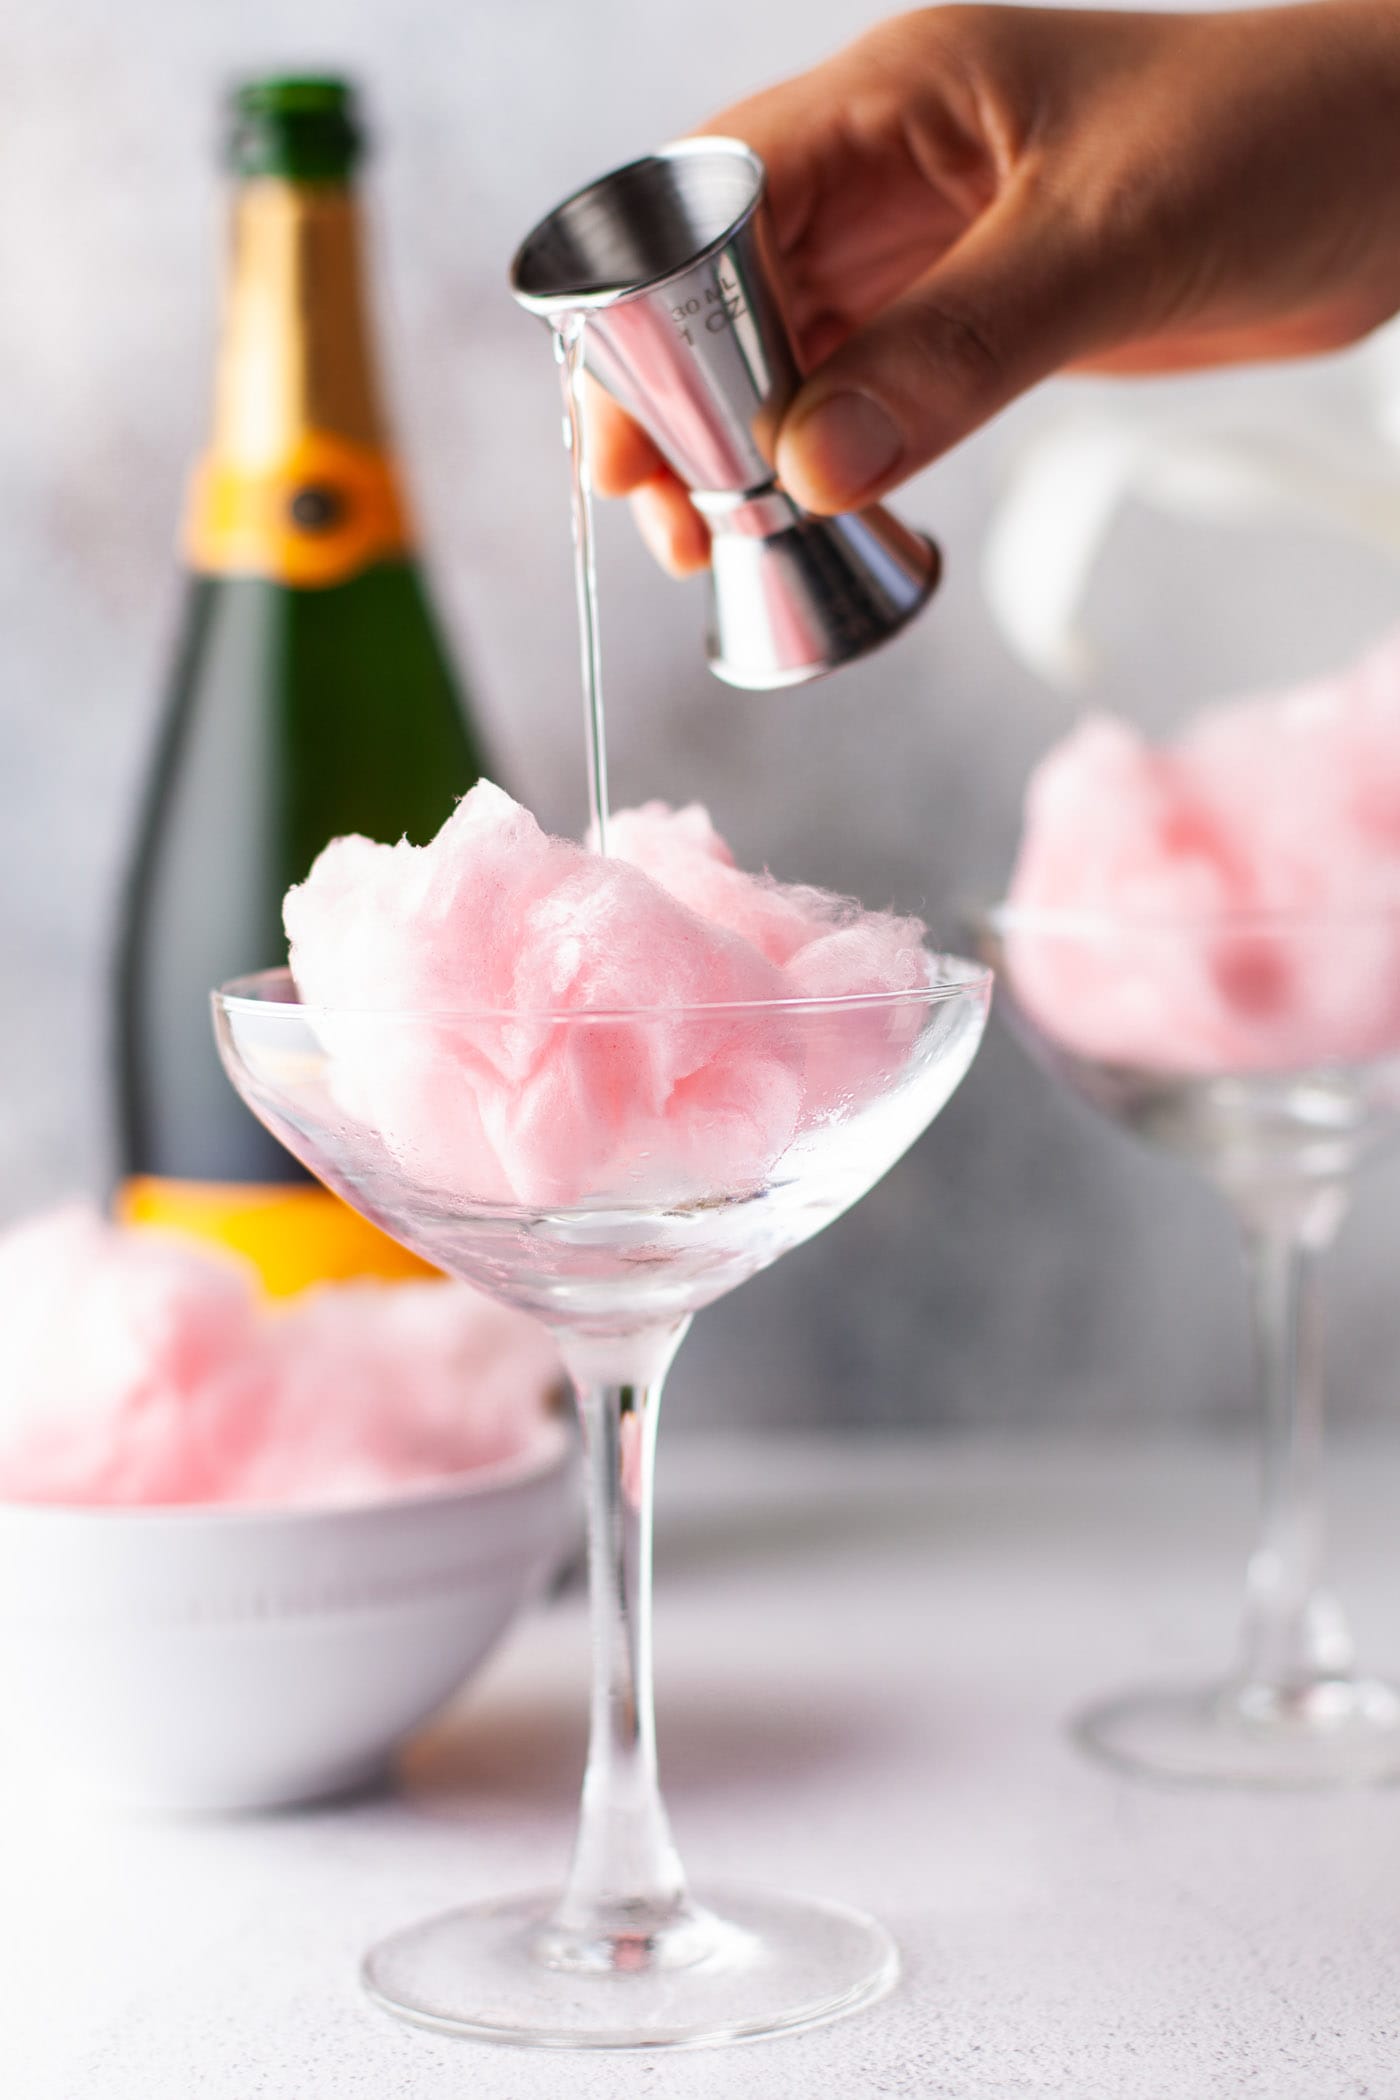 hand pouring orange liquor into glass of cotton candy